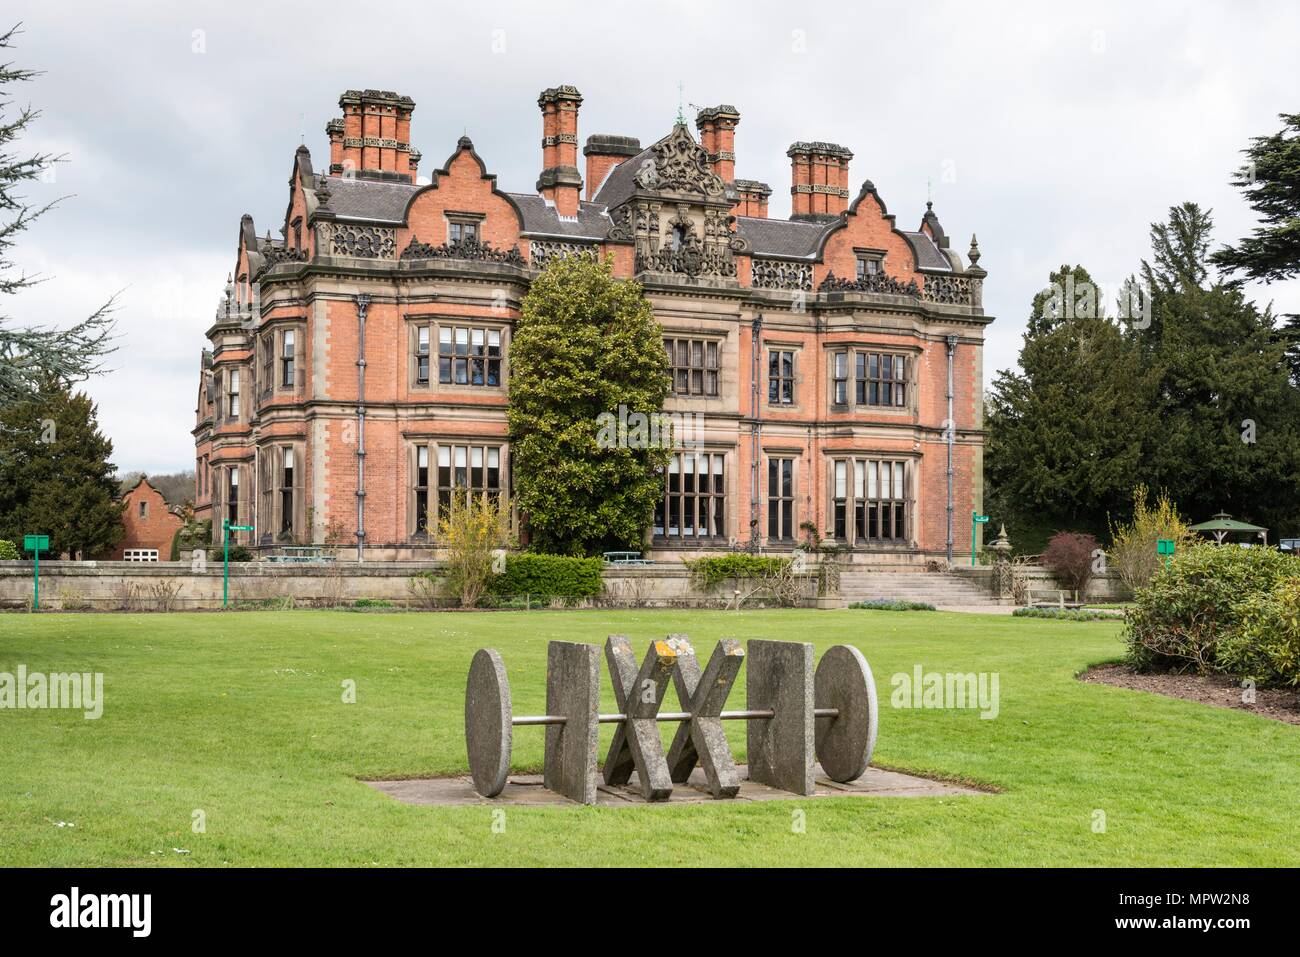 'Declaration', sculpture by Philip King, Beaumanor Hall, Woodhouse, Leicestershire, 2015.  Artist: Steven Baker. Stock Photo